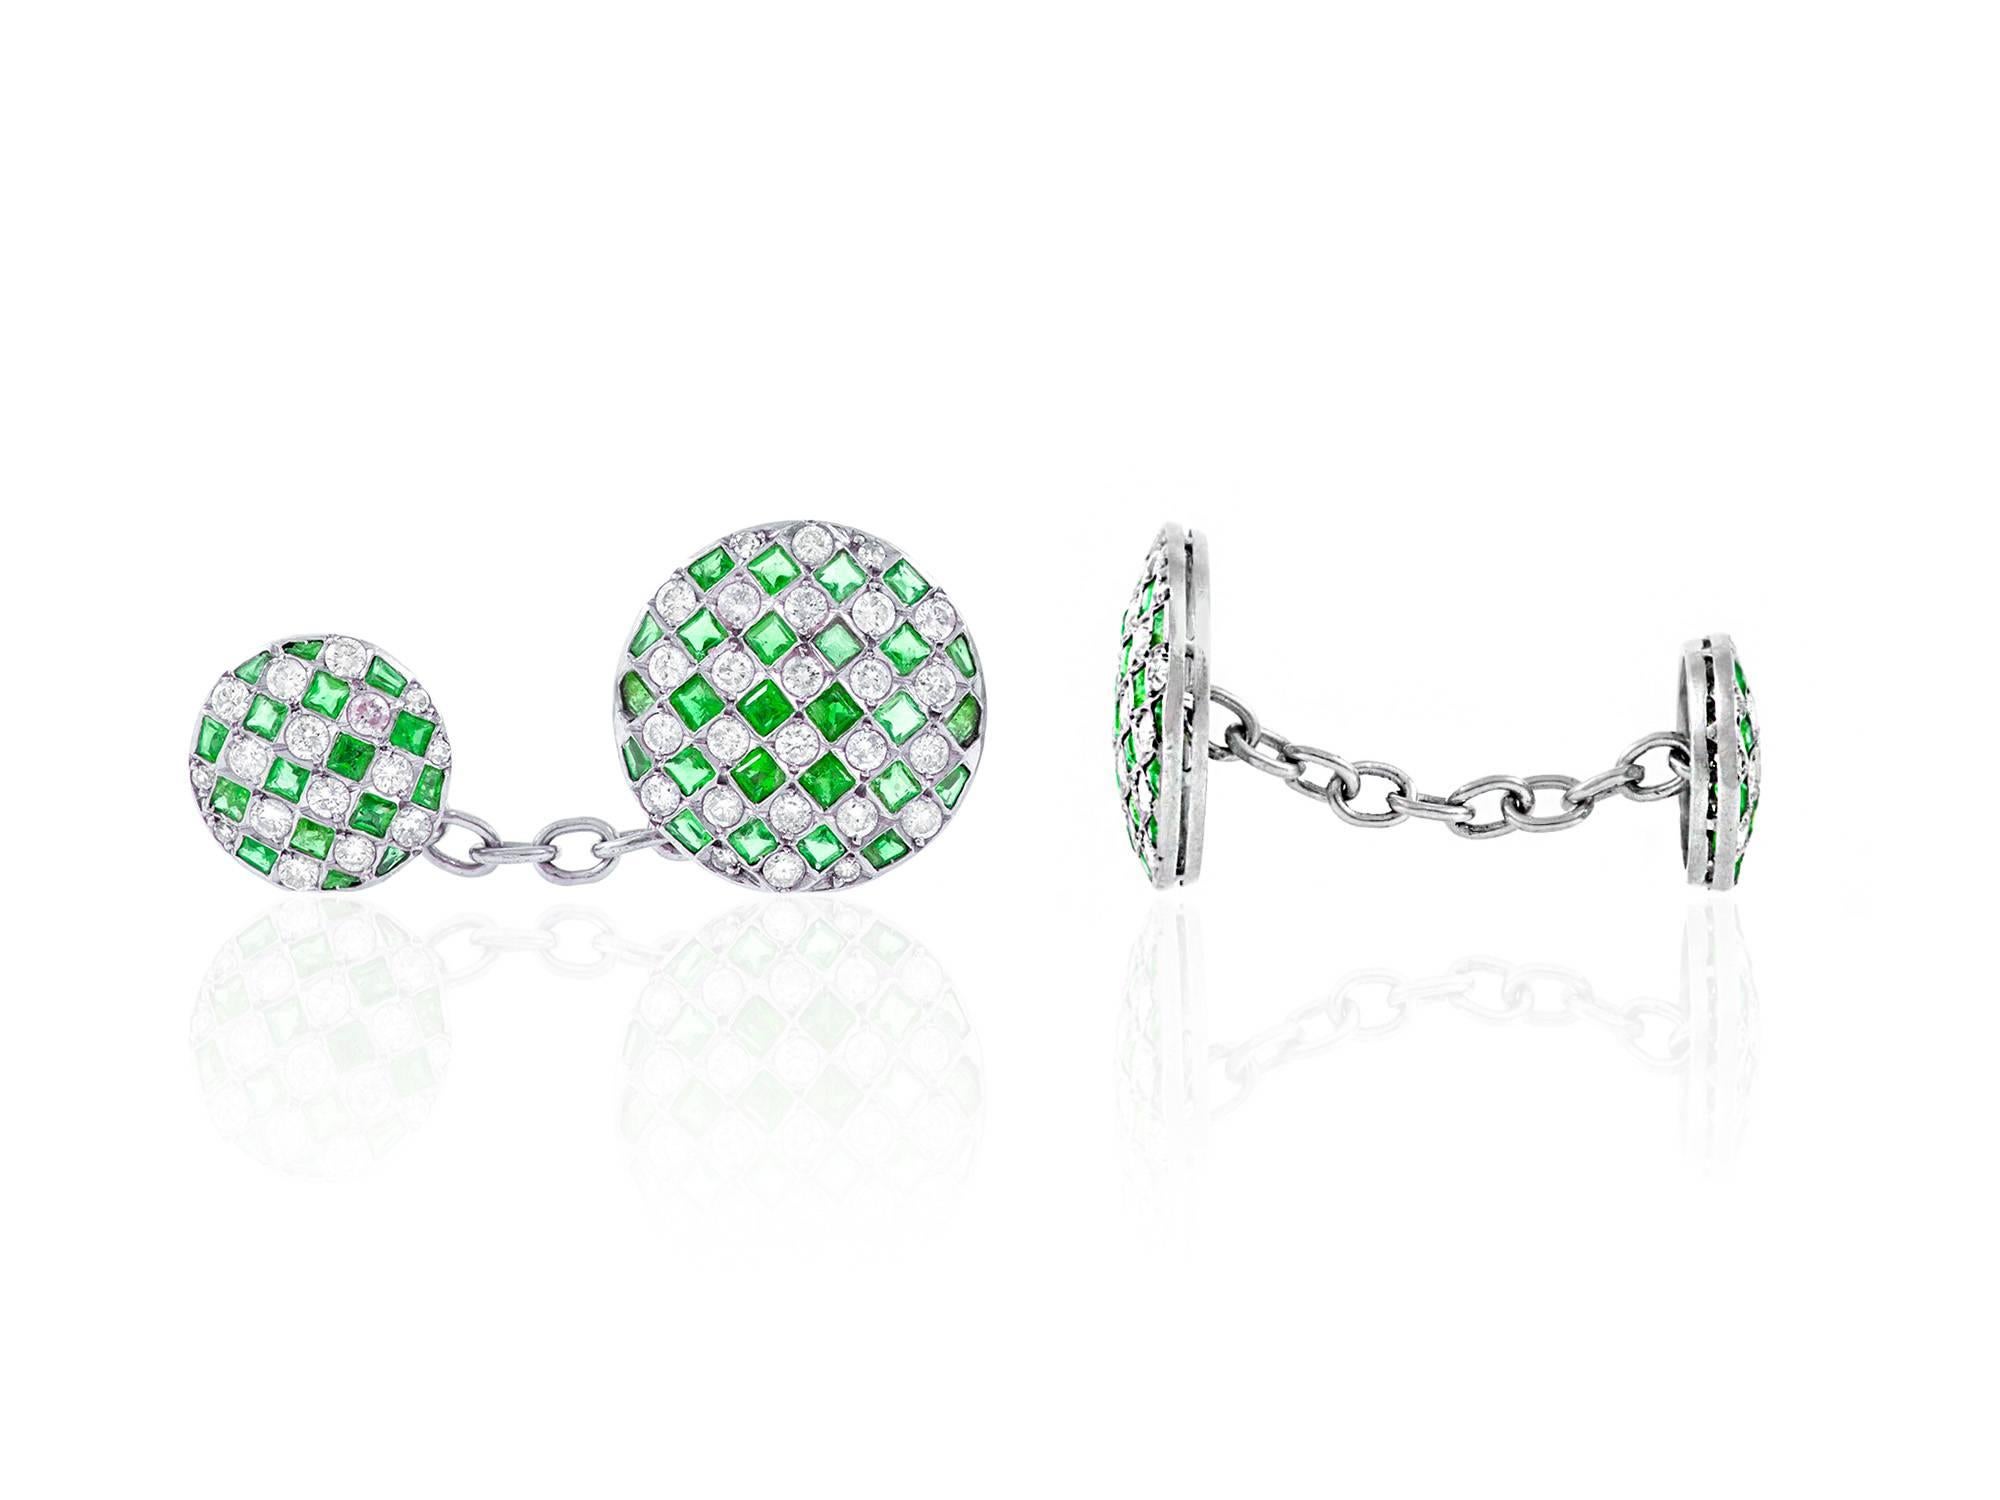 Cufflinks finely crafted in platinum with diamonds weighing a total of 2.00 carat and emerald weighing a total of 5.00 carat.